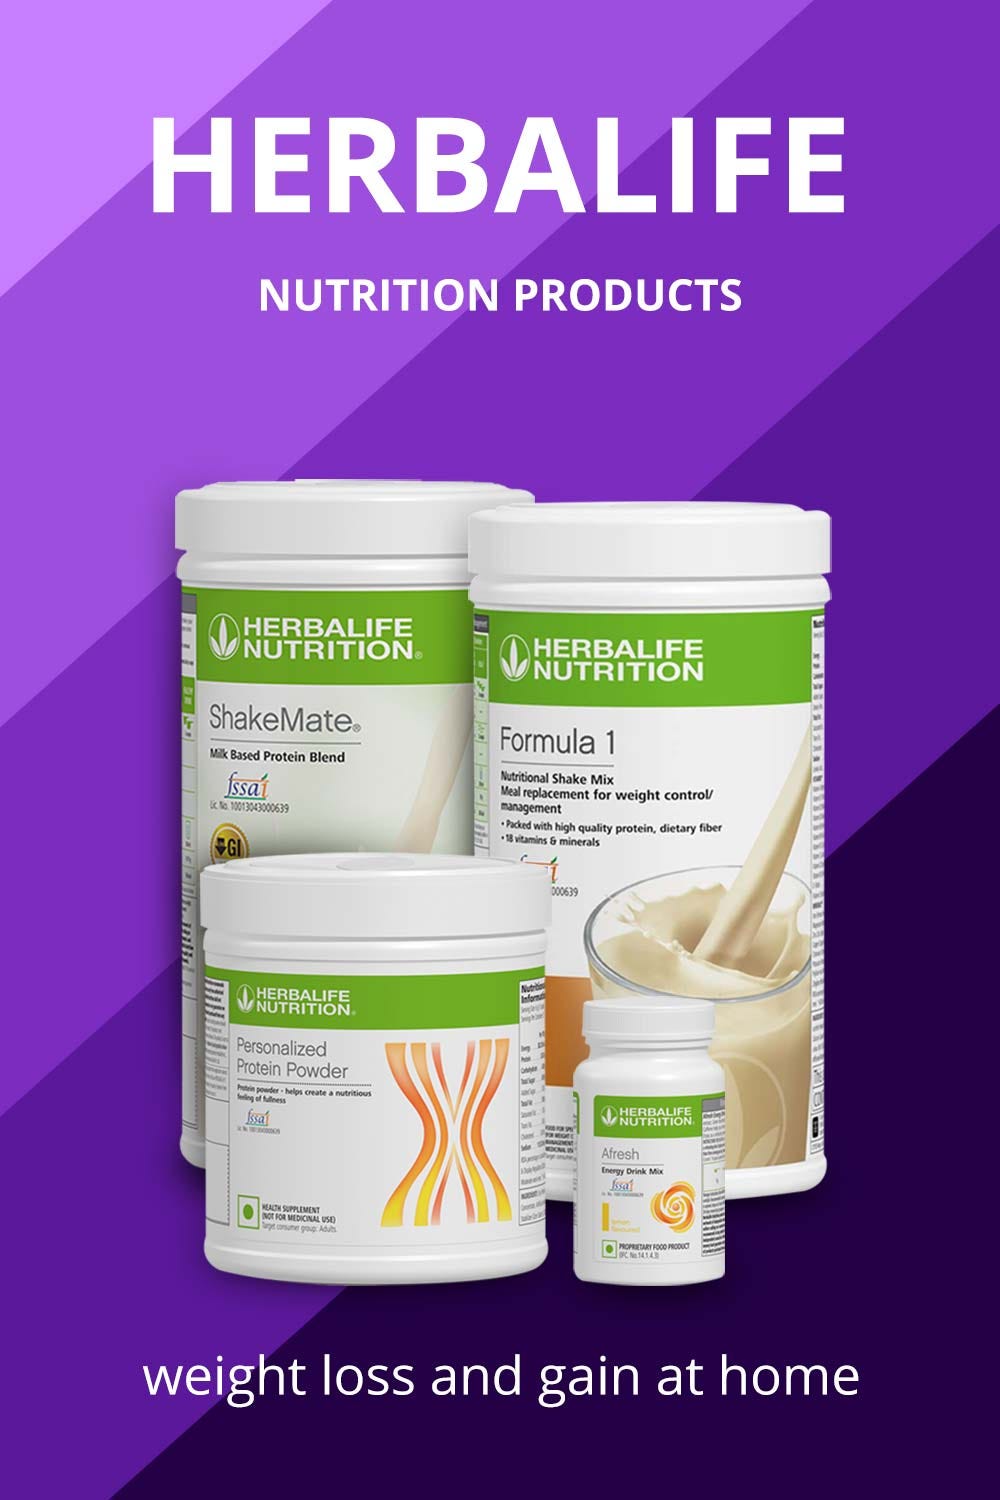 Herbalife Nutrition: Improving Nutrition Habits with High-Quality Products